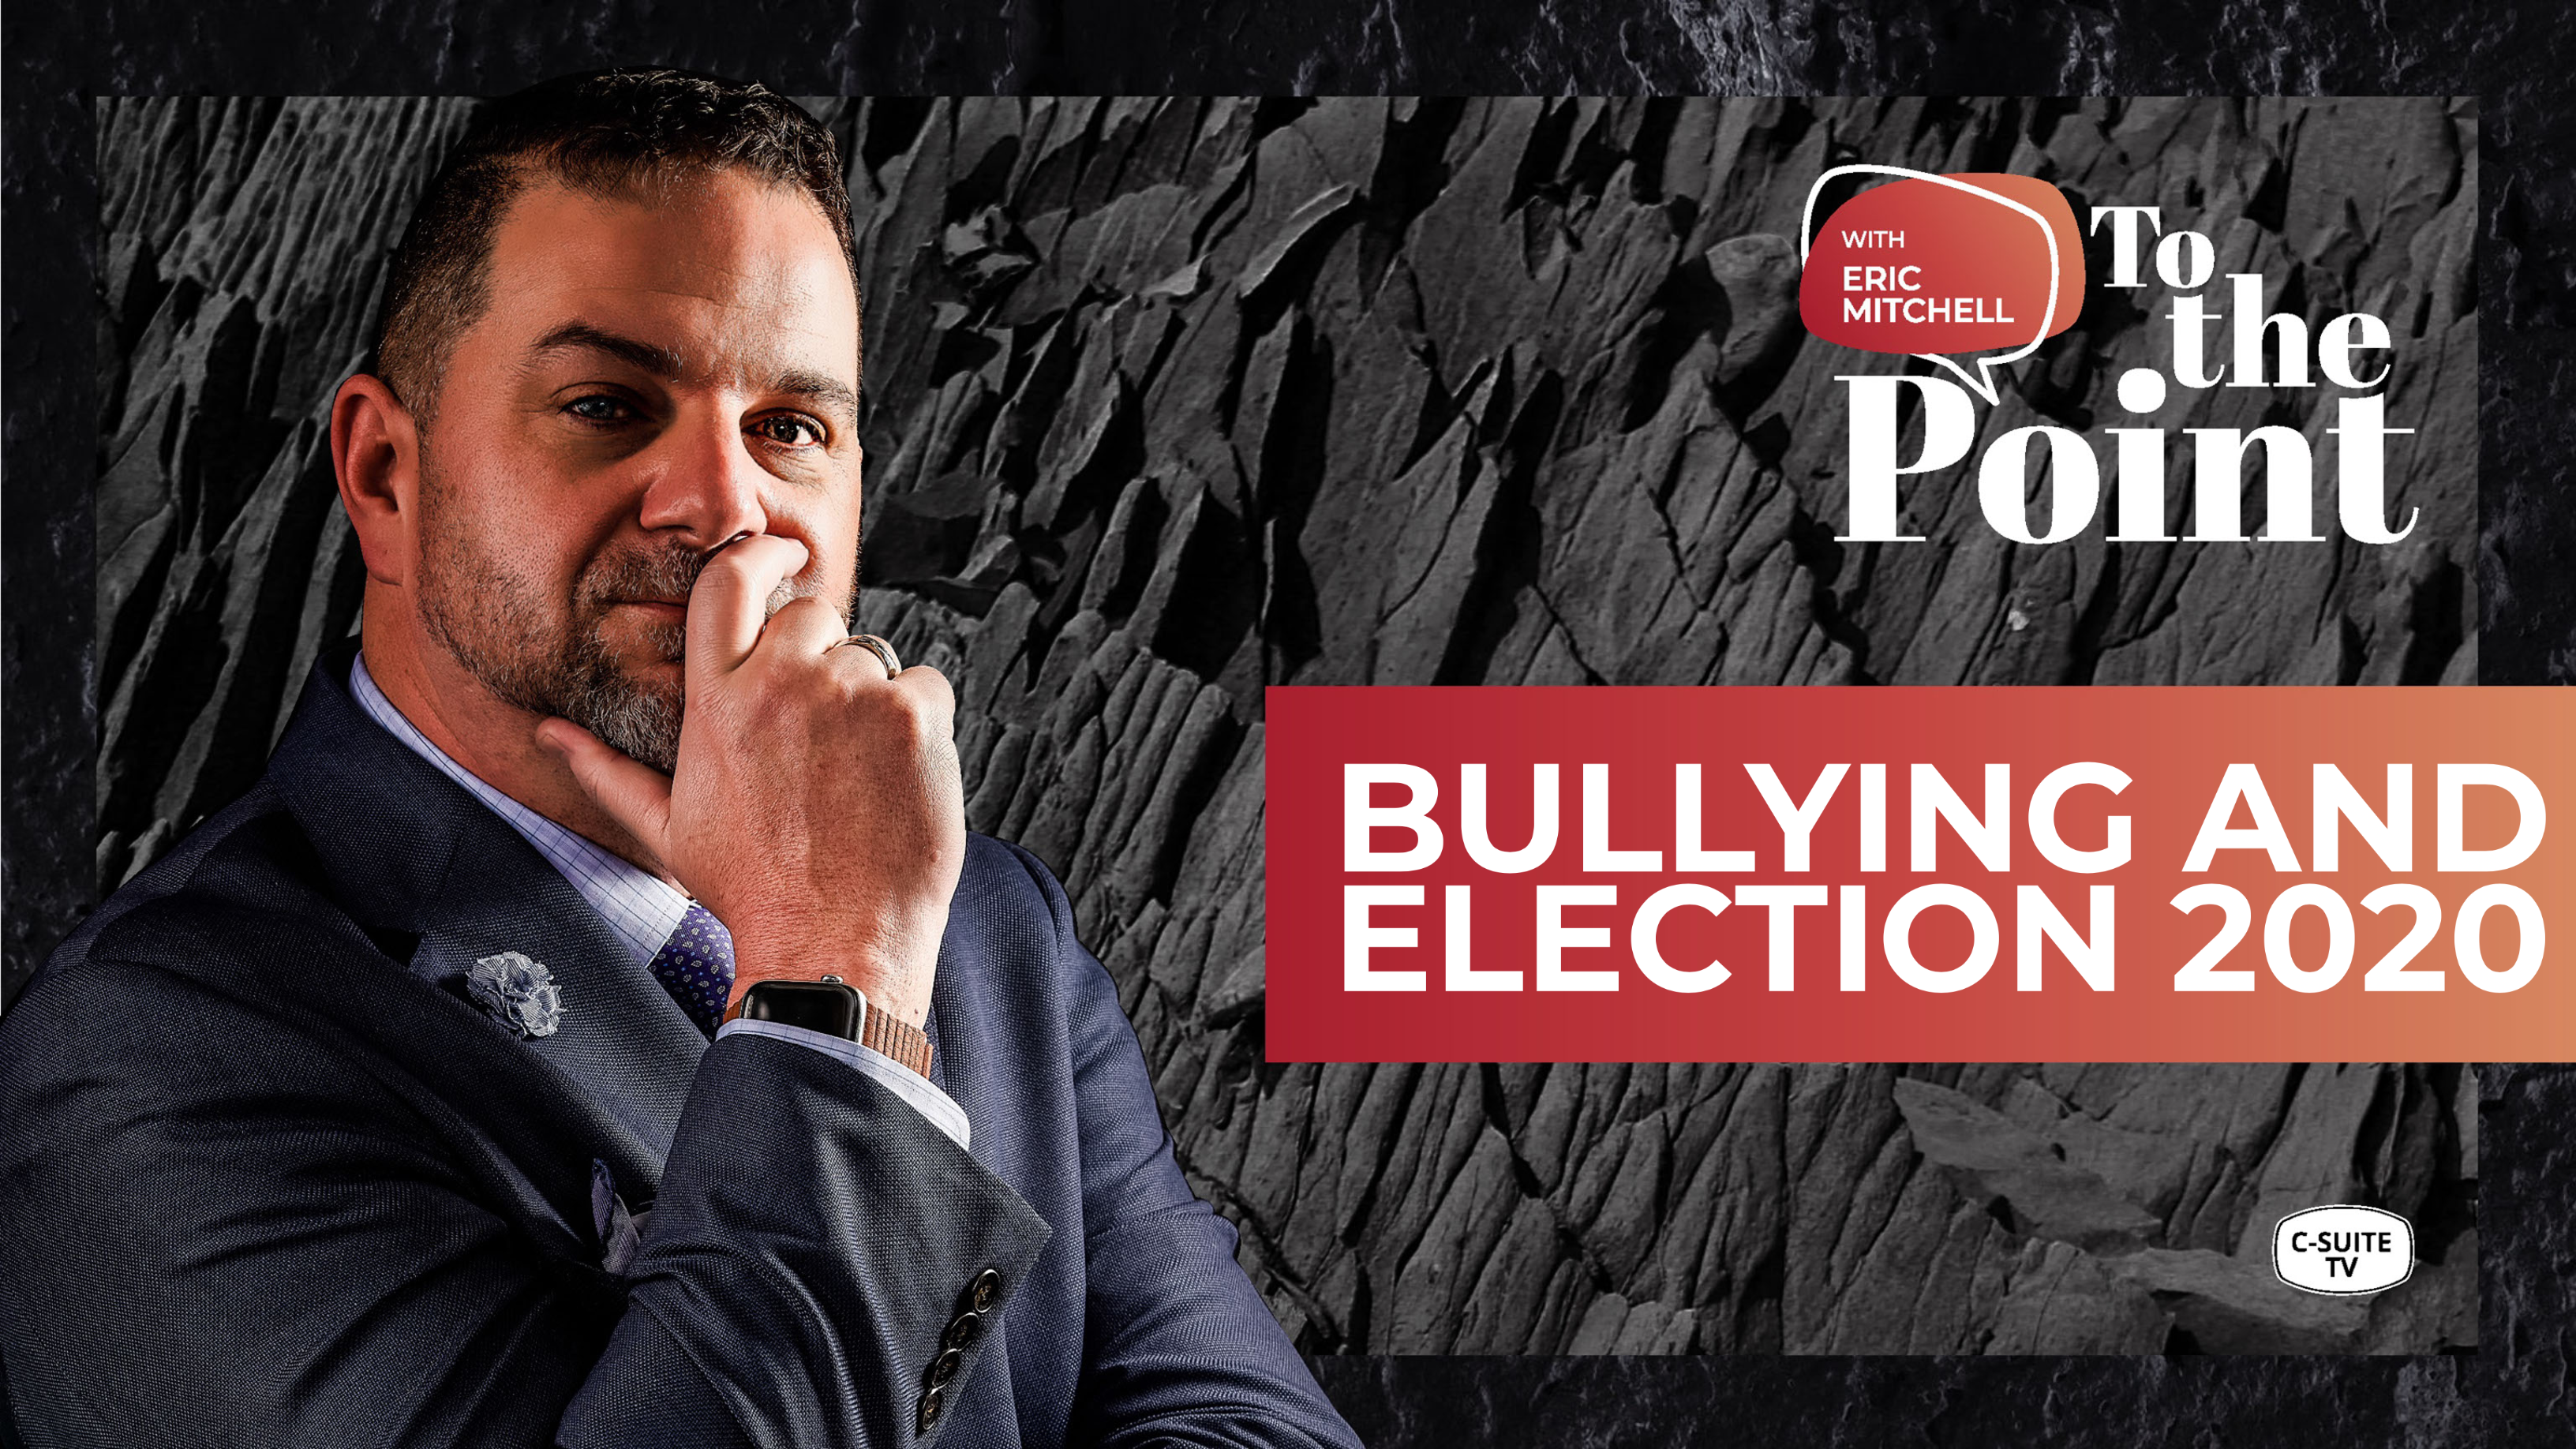 Insight into Adult Bullying and Election 2020